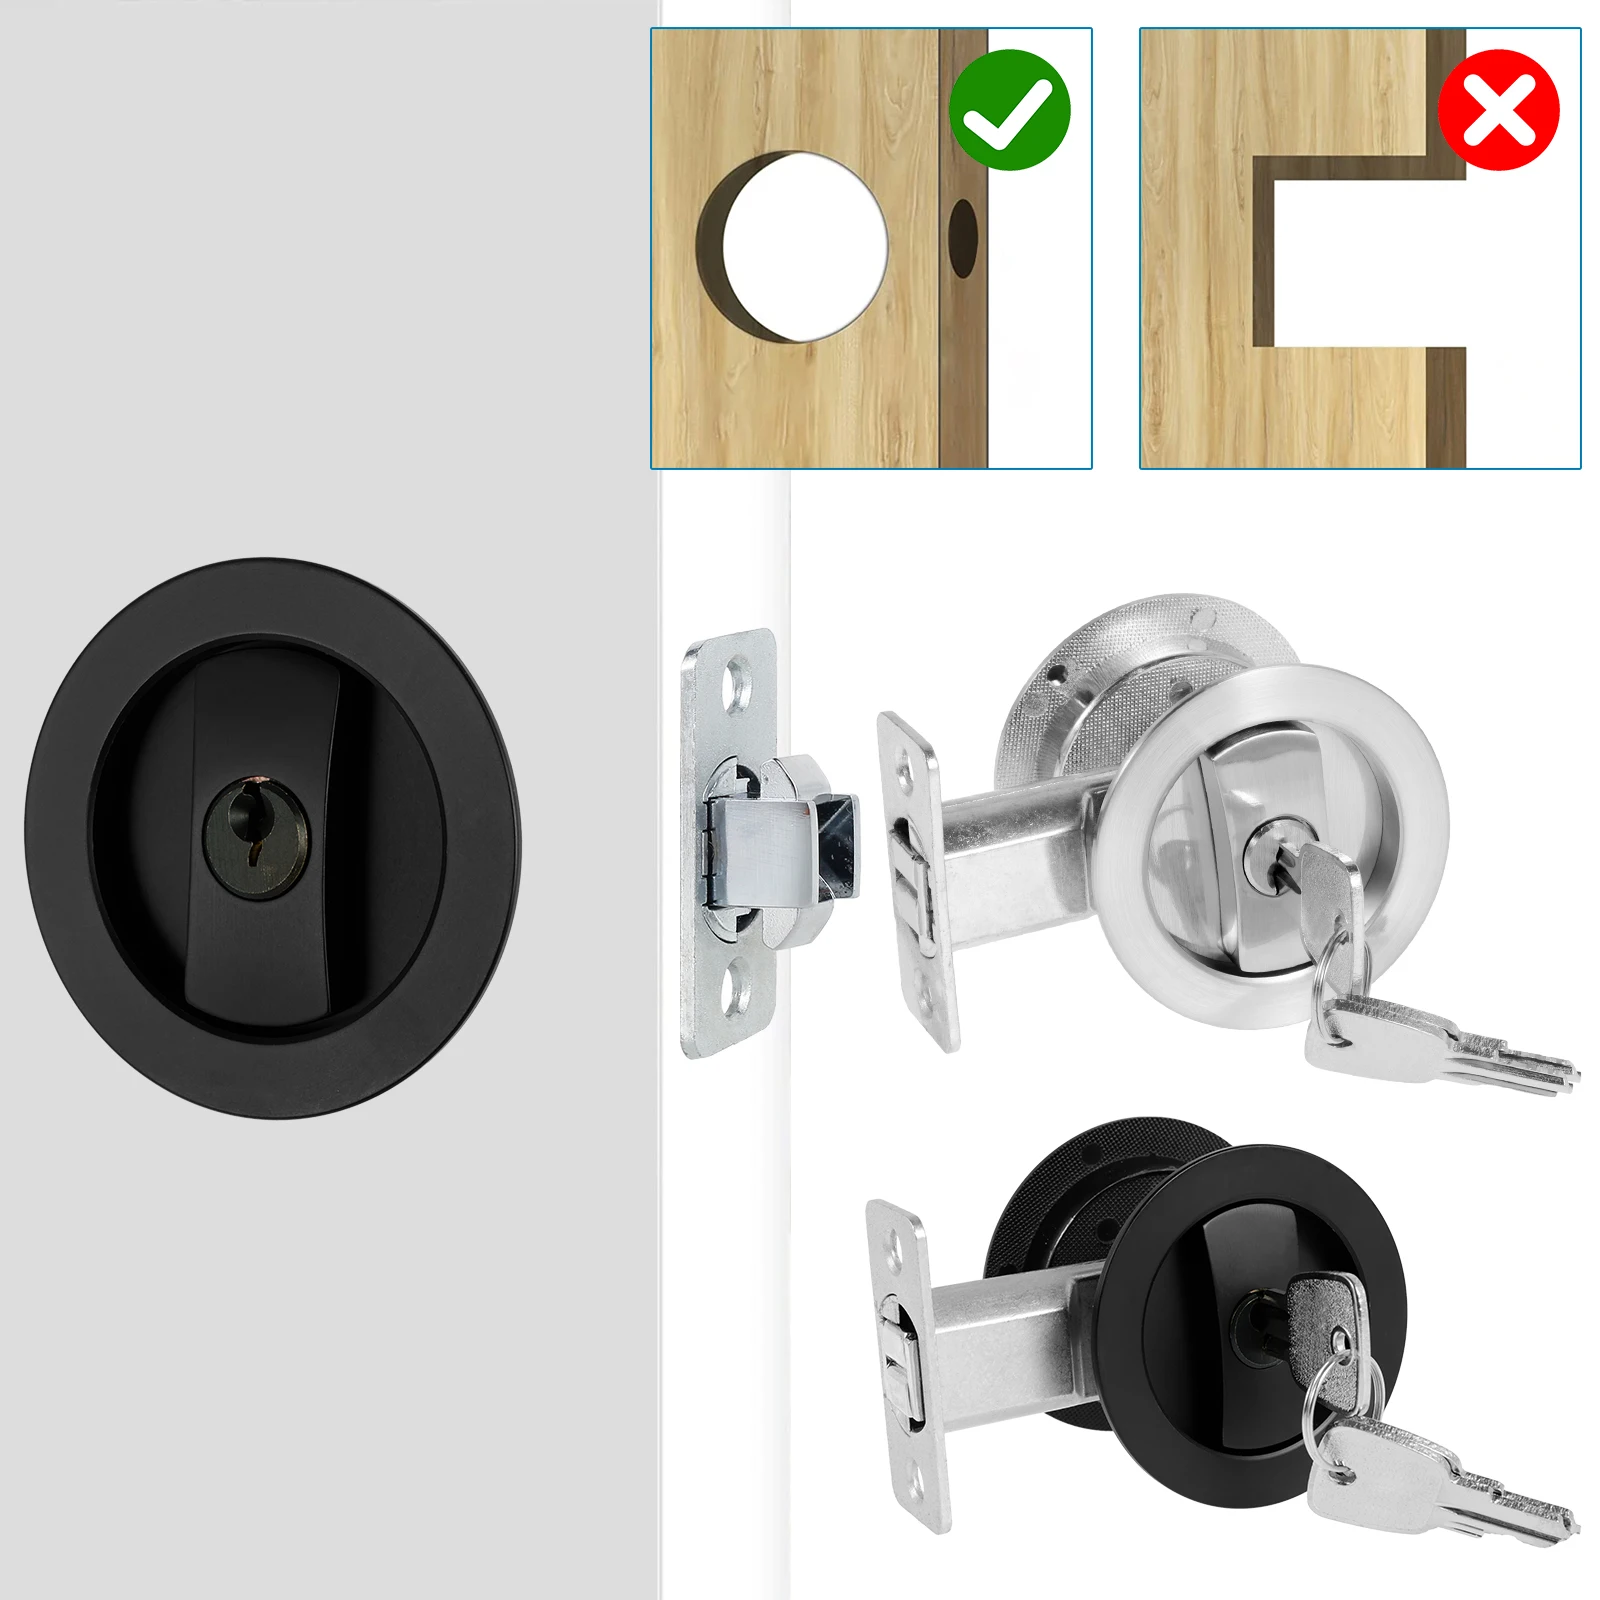 

Bed/Bath Pocket Door Lock and Pull Round Privacy Door Lock with Key Recessed 2 Sided Invisible Sliding Door Locks Hardware for 1